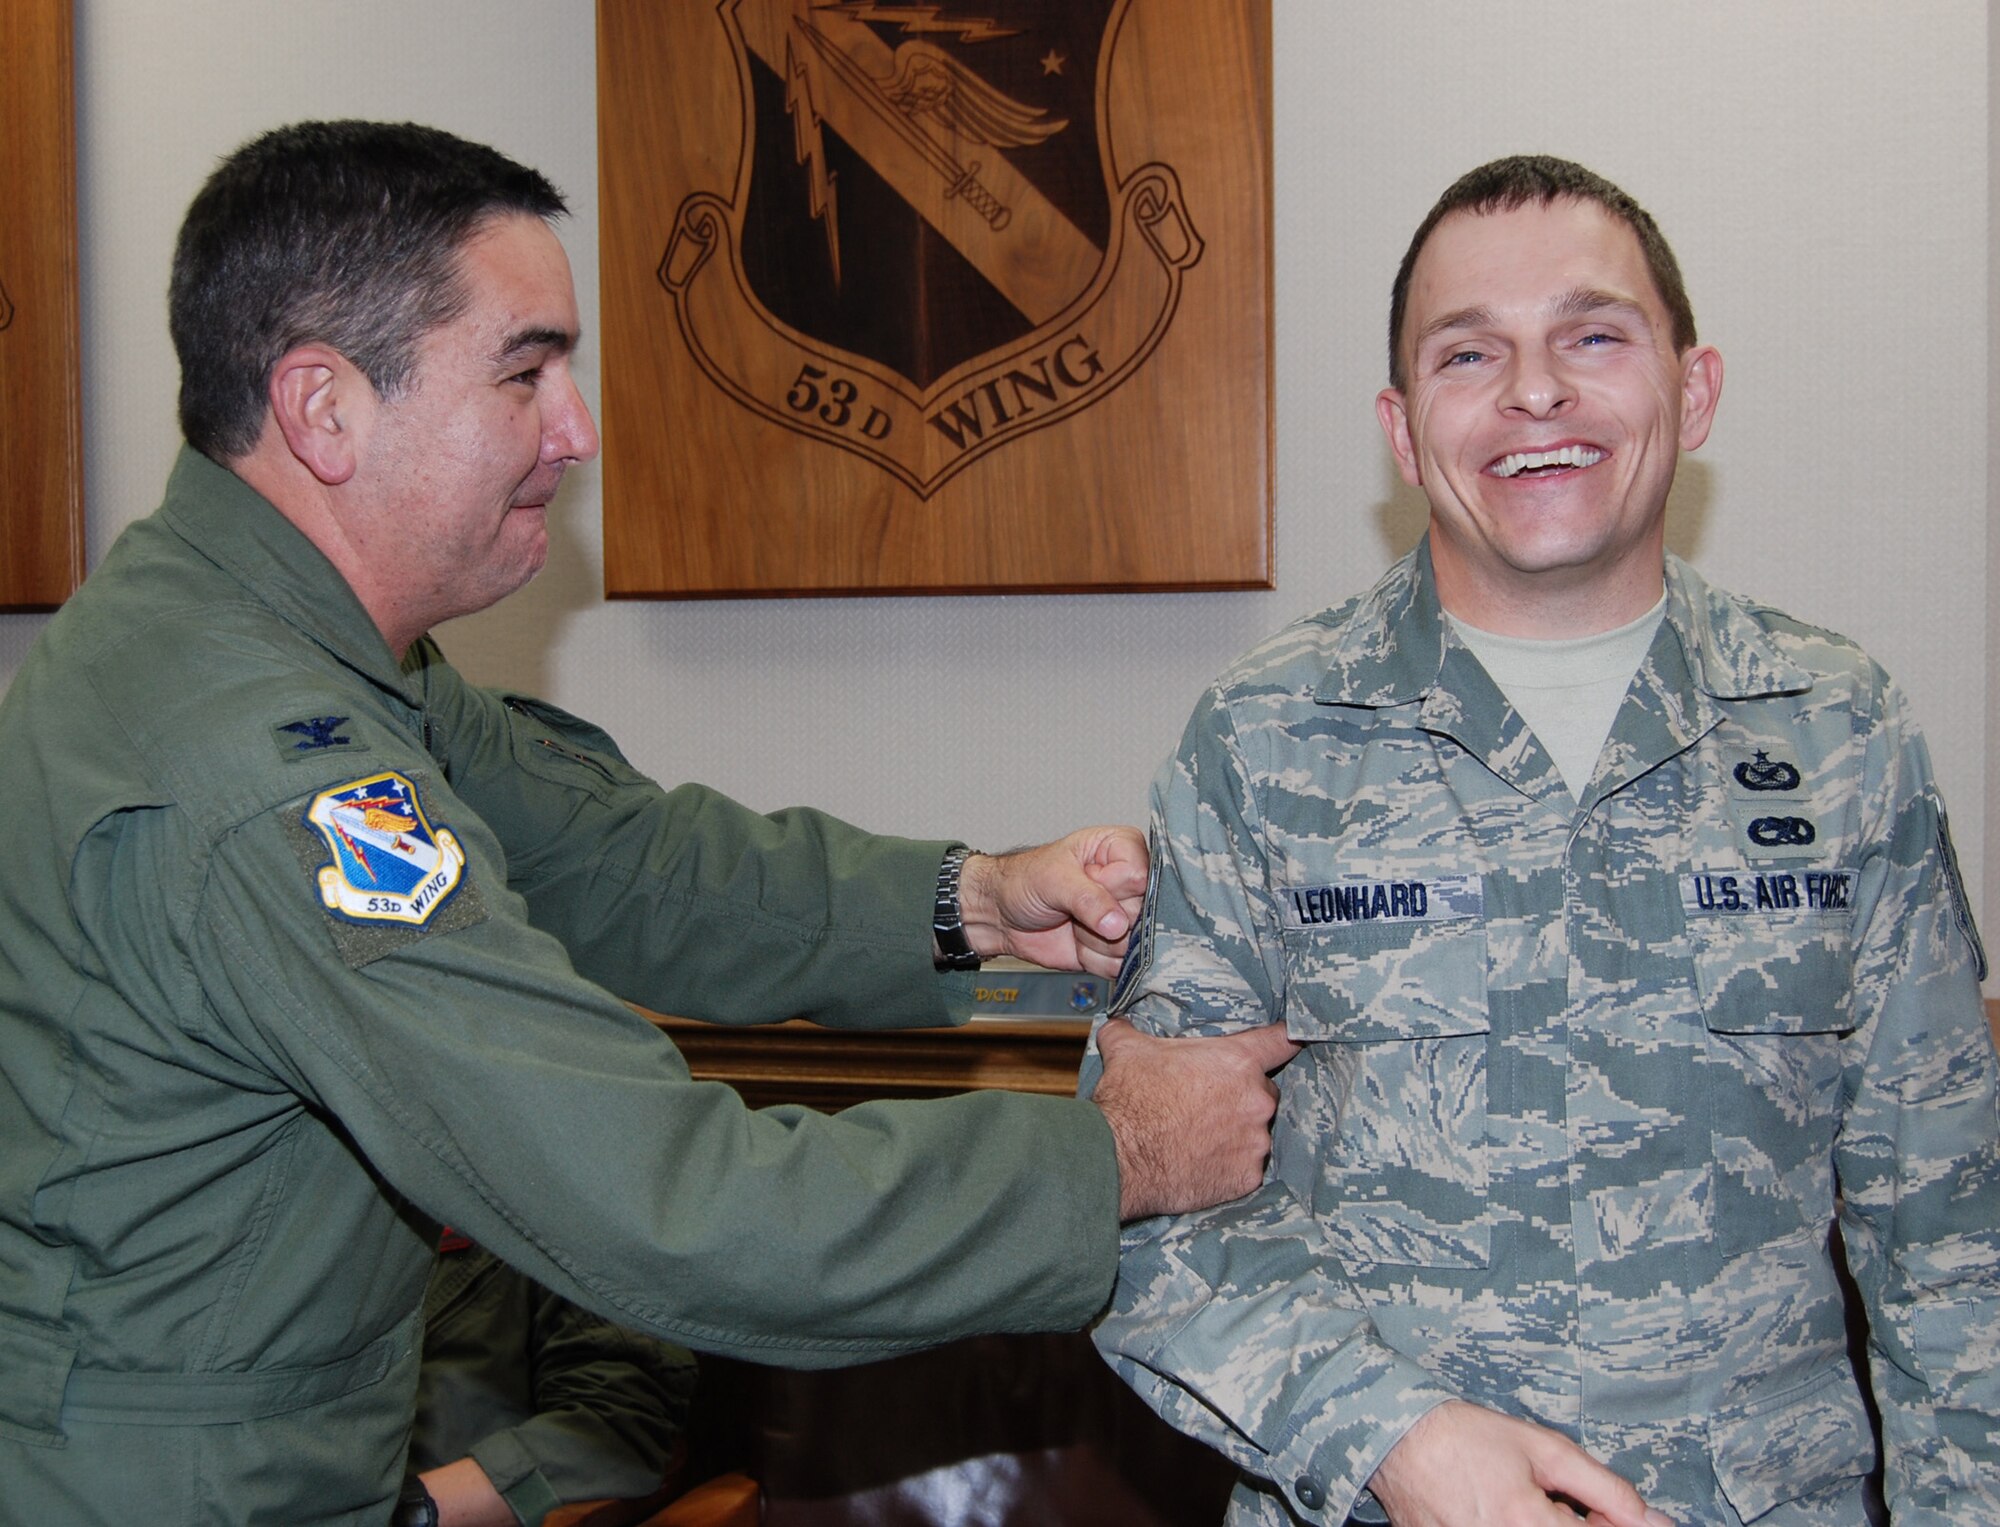 Newly promoted "Master" Sgt. Andrew Leonhard, 53d Wing public affairs, gets his stripes "tacked" on by Col. Mick Guthals, 53d Wing vice commander, at a staff meeting Jan. 14 at Eglin Air Force Base.  The new senior NCO was promoted via the Stripes for Exceptional Performers program.  Air Force photo by Capt. Carrie Kessler.